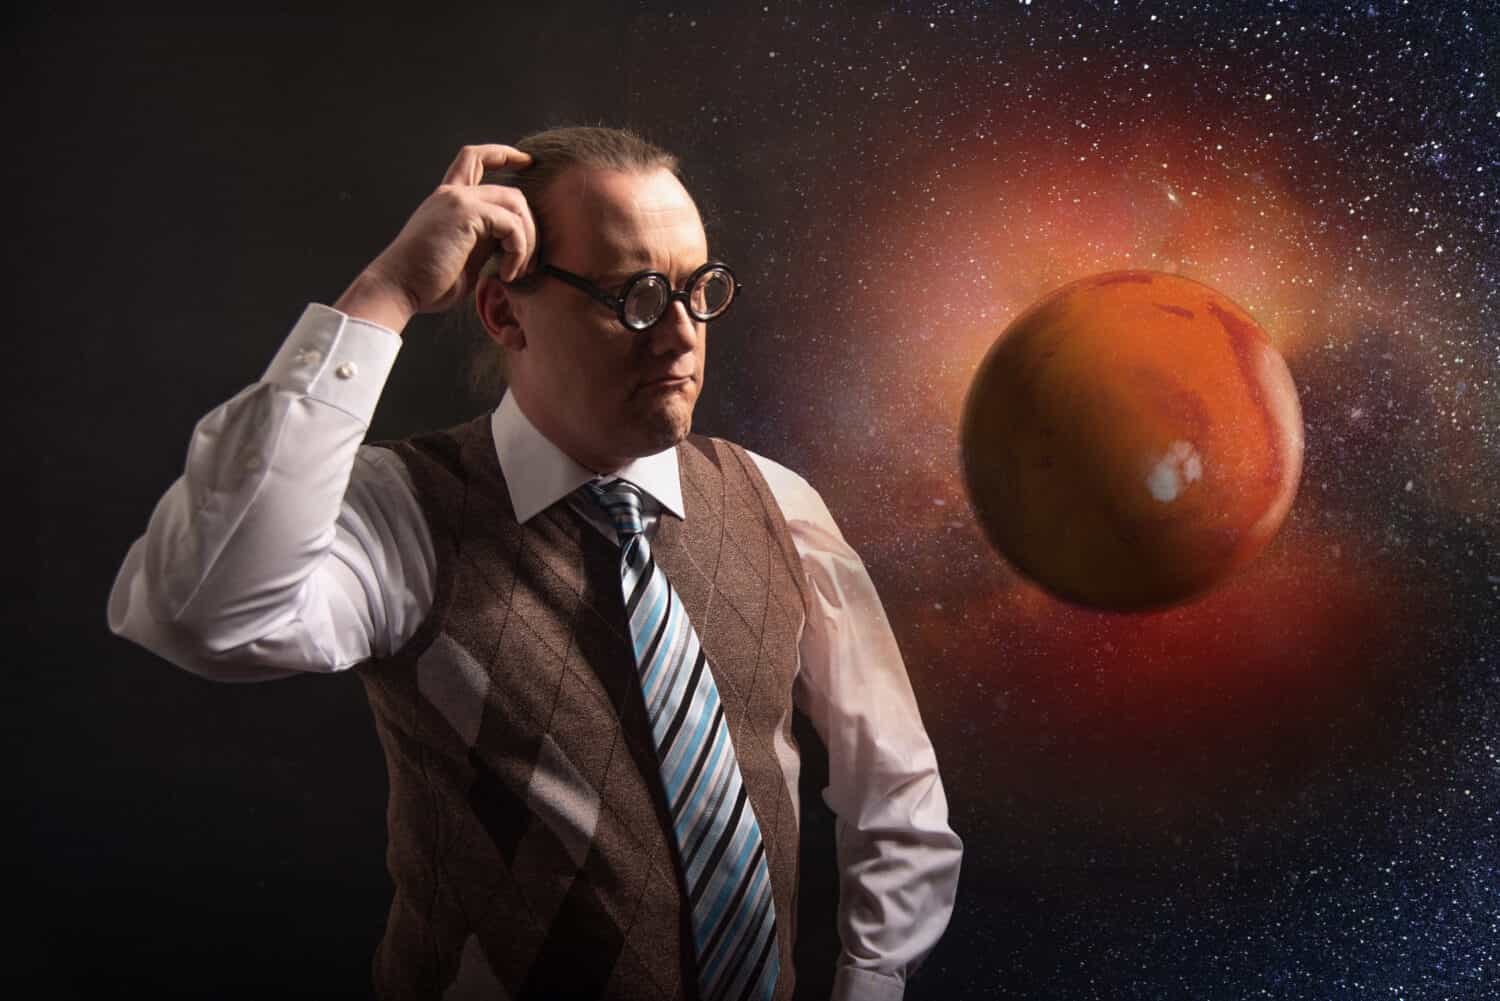 Funny scientist looking to universe and planet mars